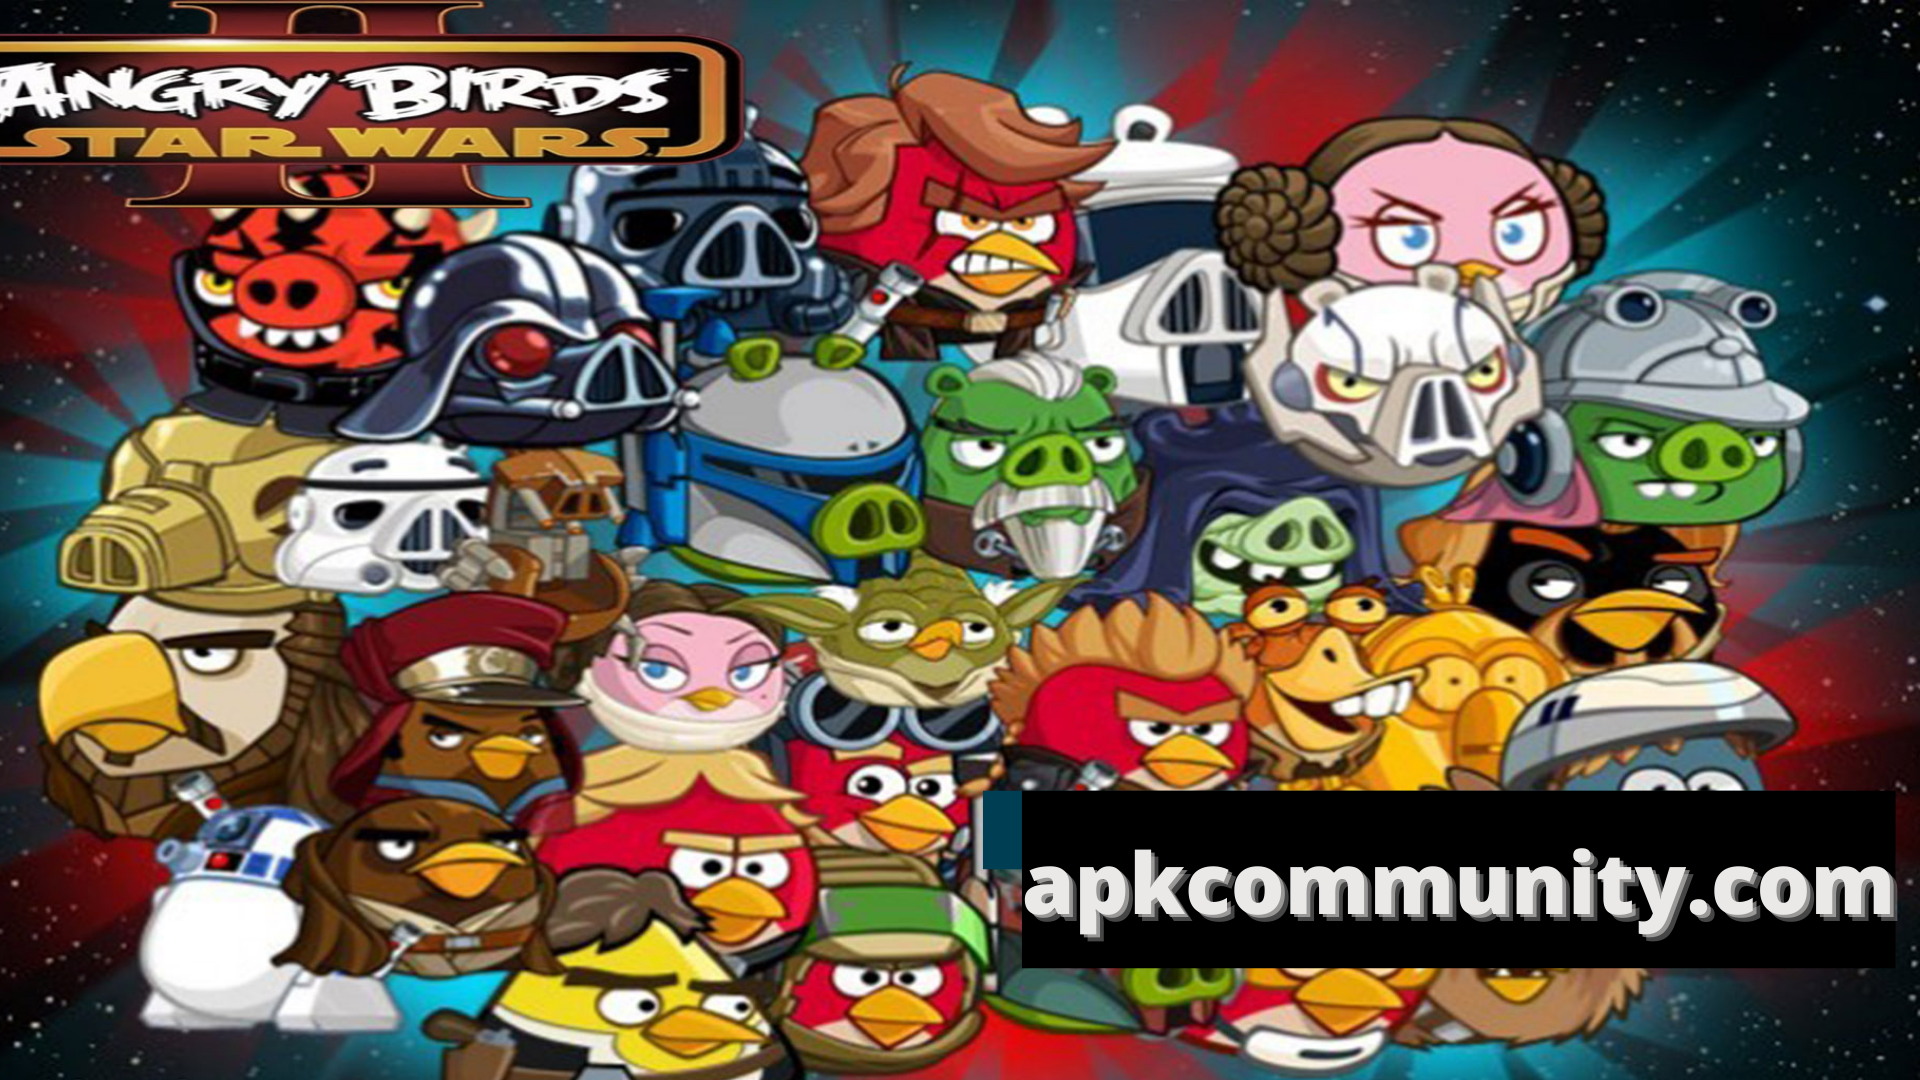 Angry Birds Star Wars 2 Mod Apk (Updated Version)